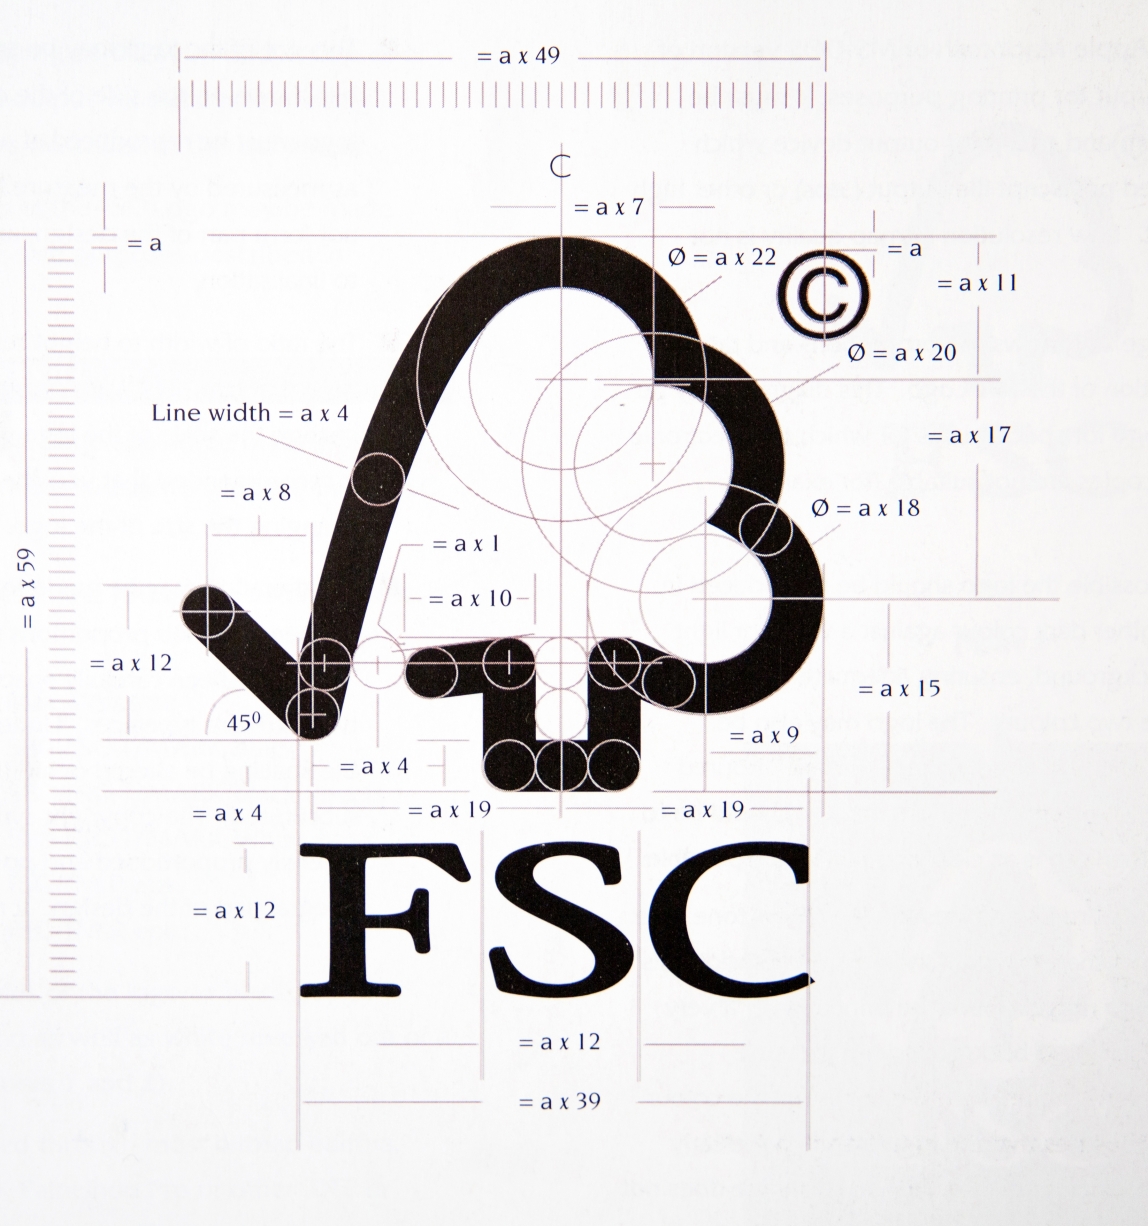 design file of the FSC logo with numerals showing proportions